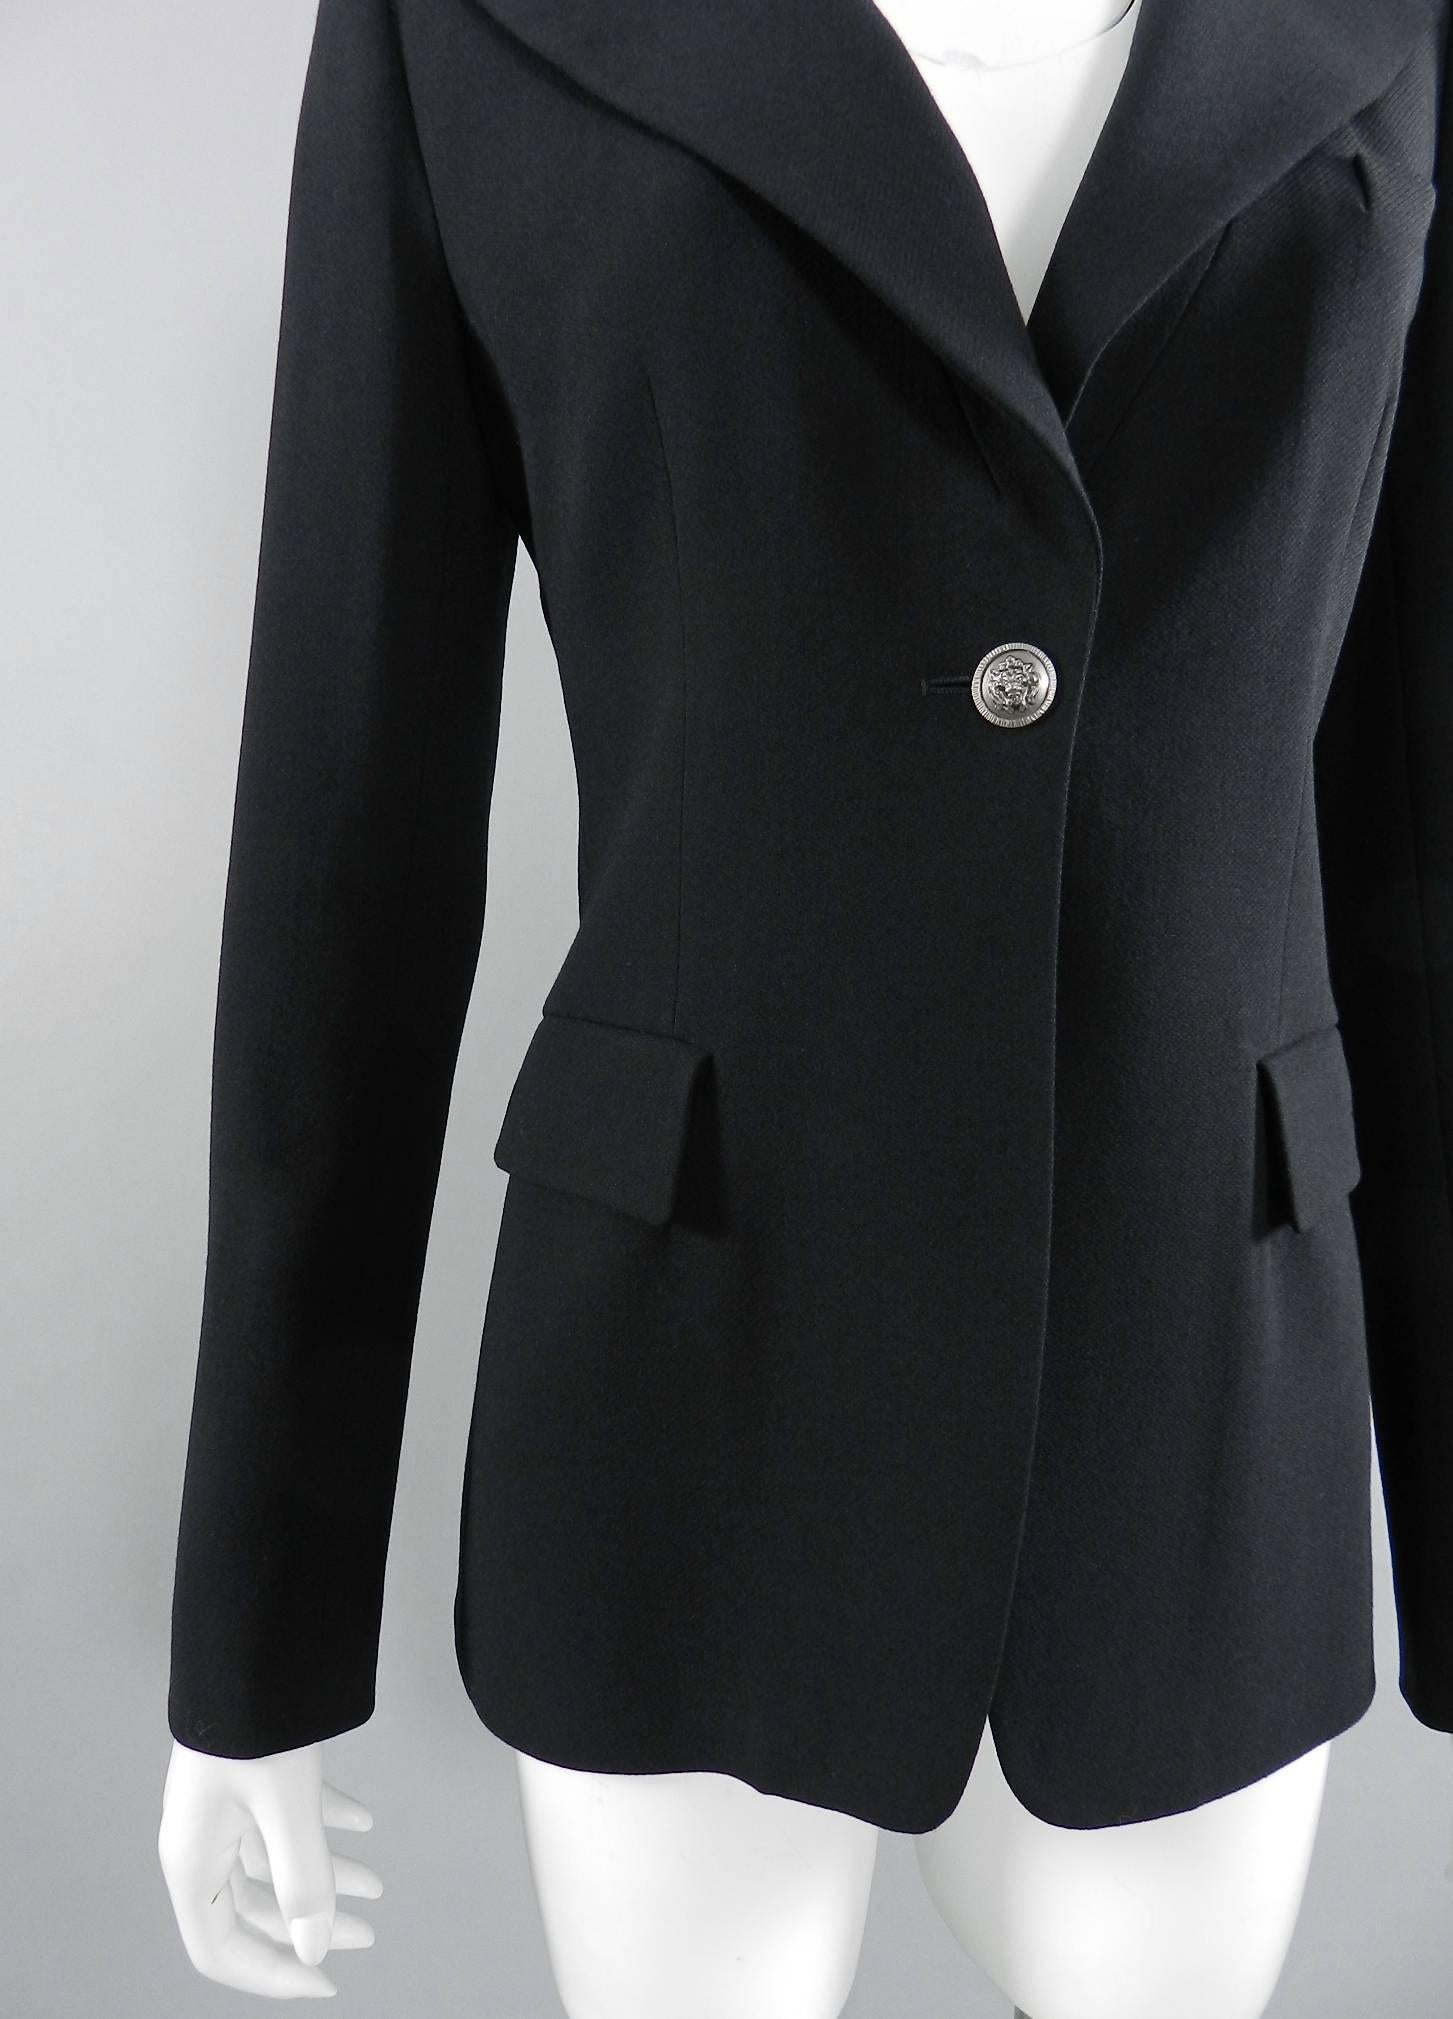 Women's CHANEL 08A Fall 2008 Classic Black Wool Blazer Jacket with Lion Button